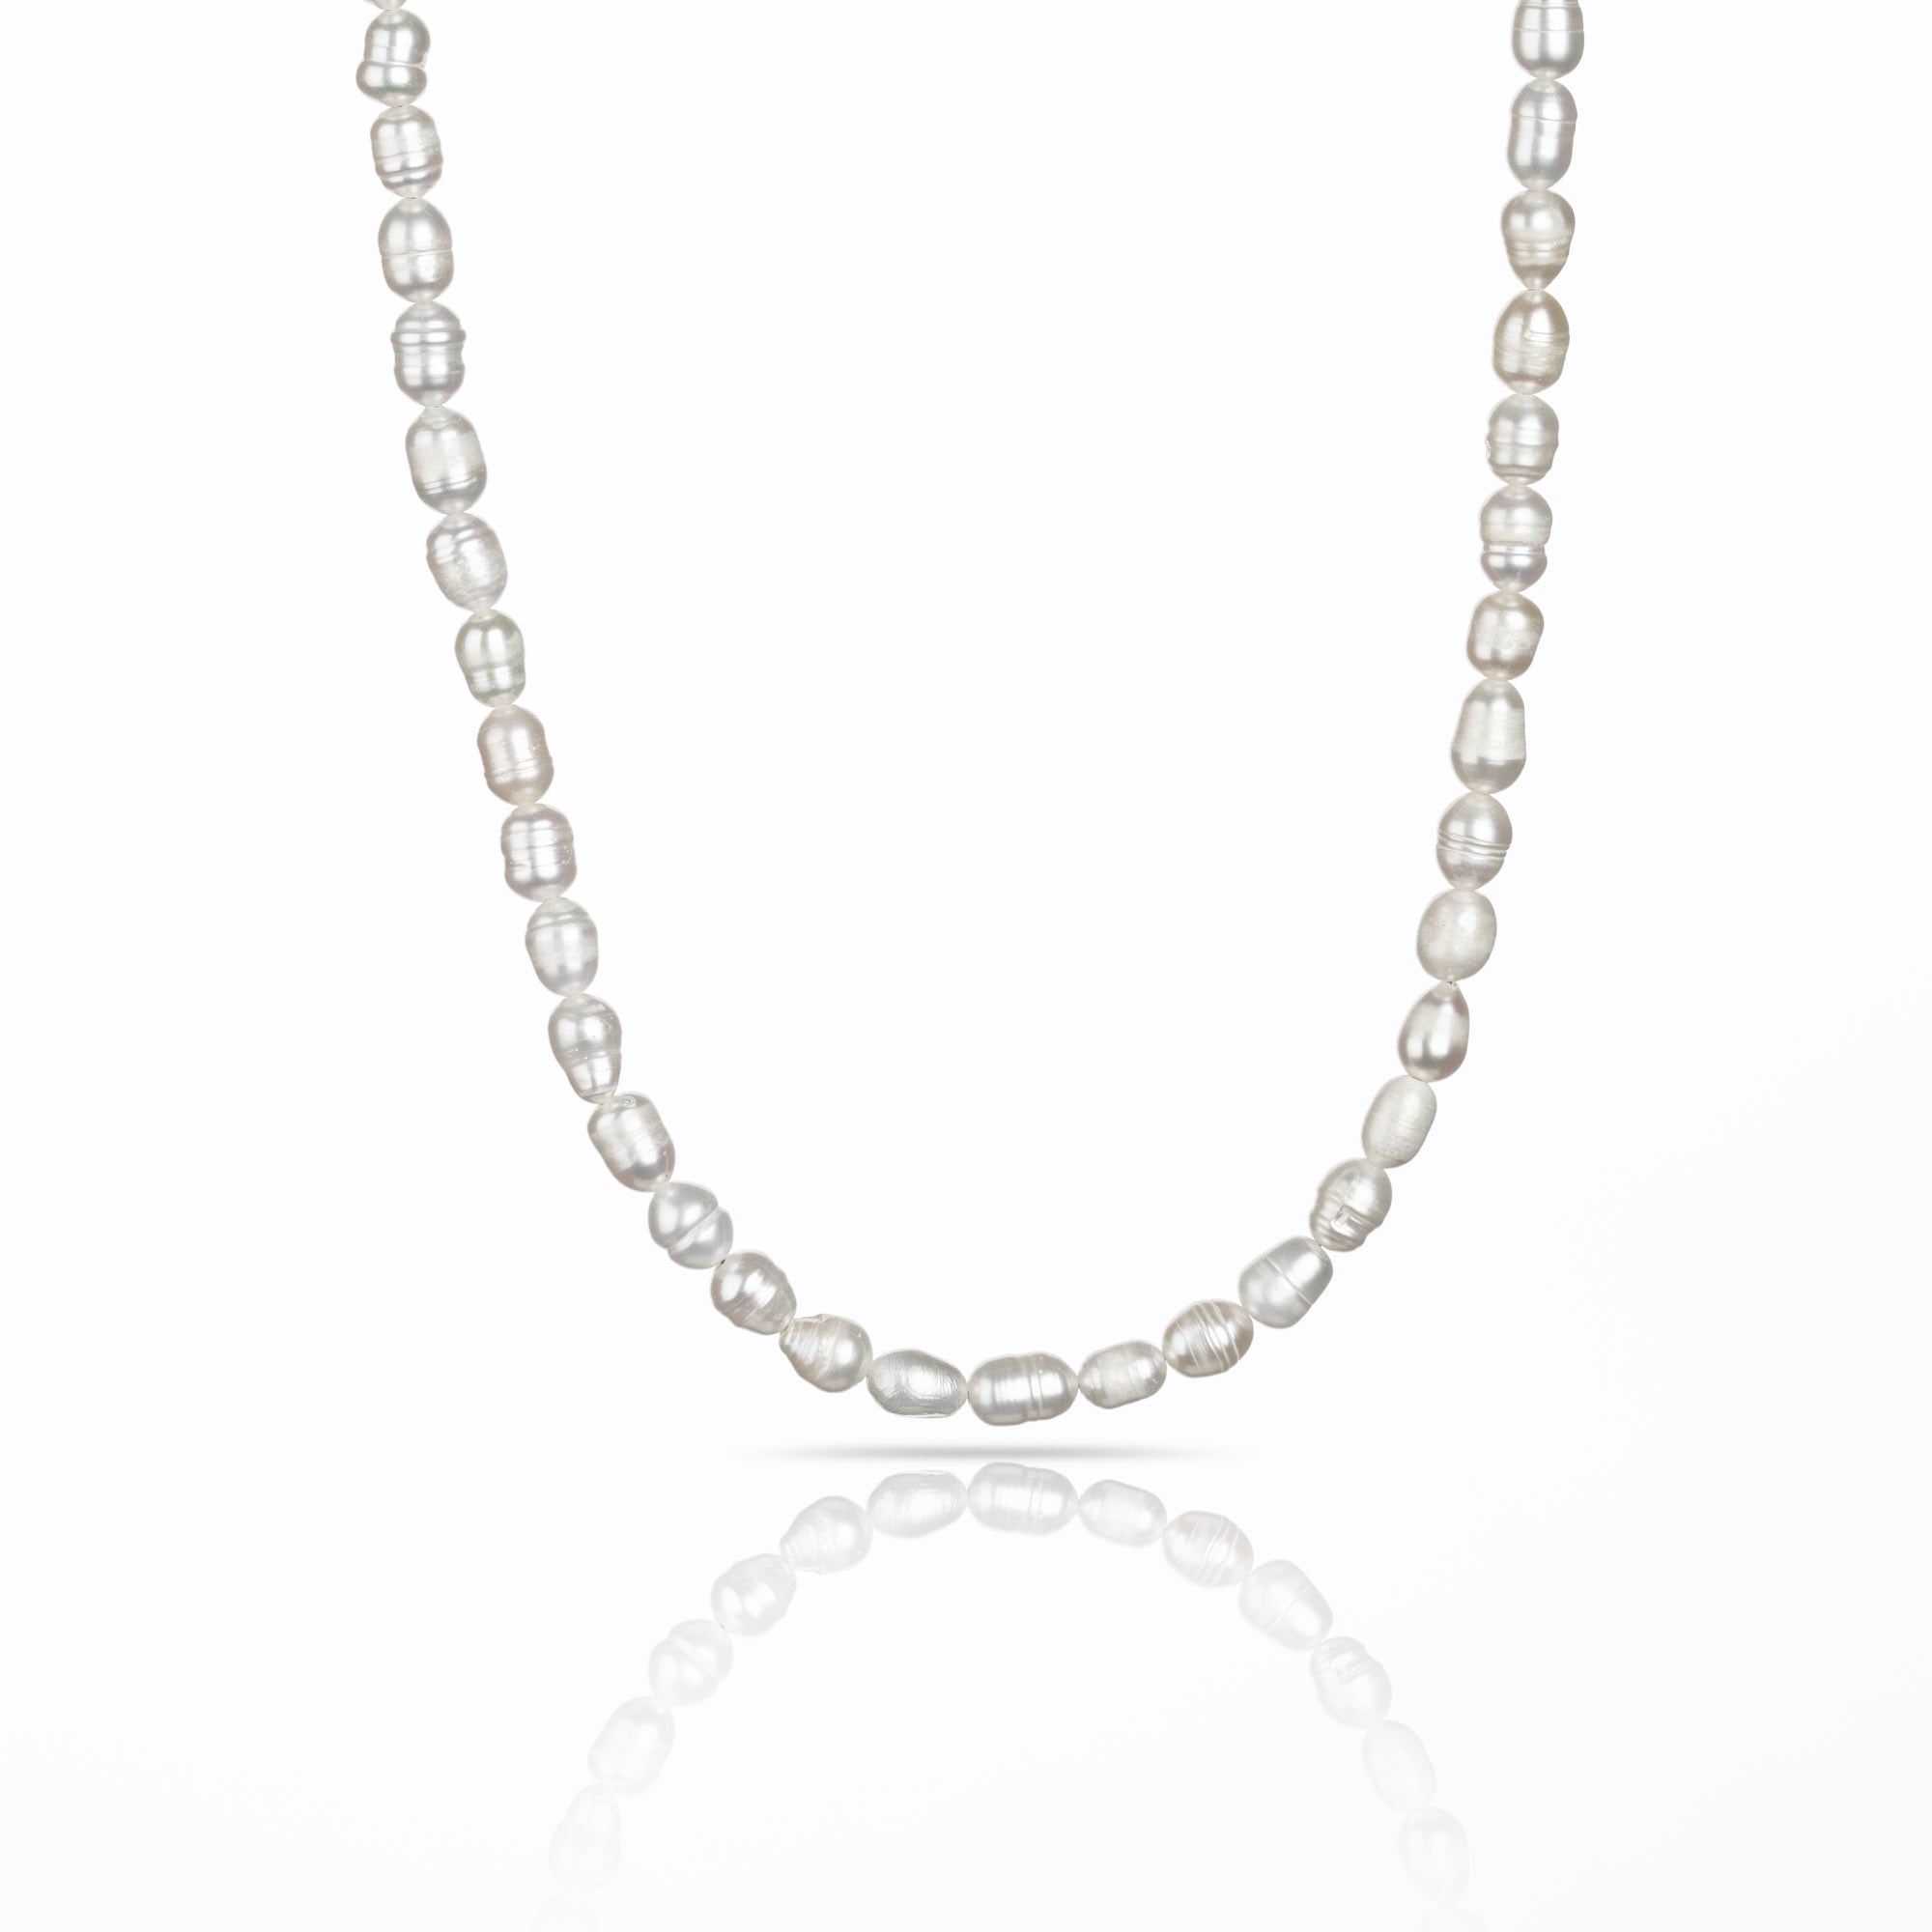 Freshwater Pearl Necklace - Oval Pearls